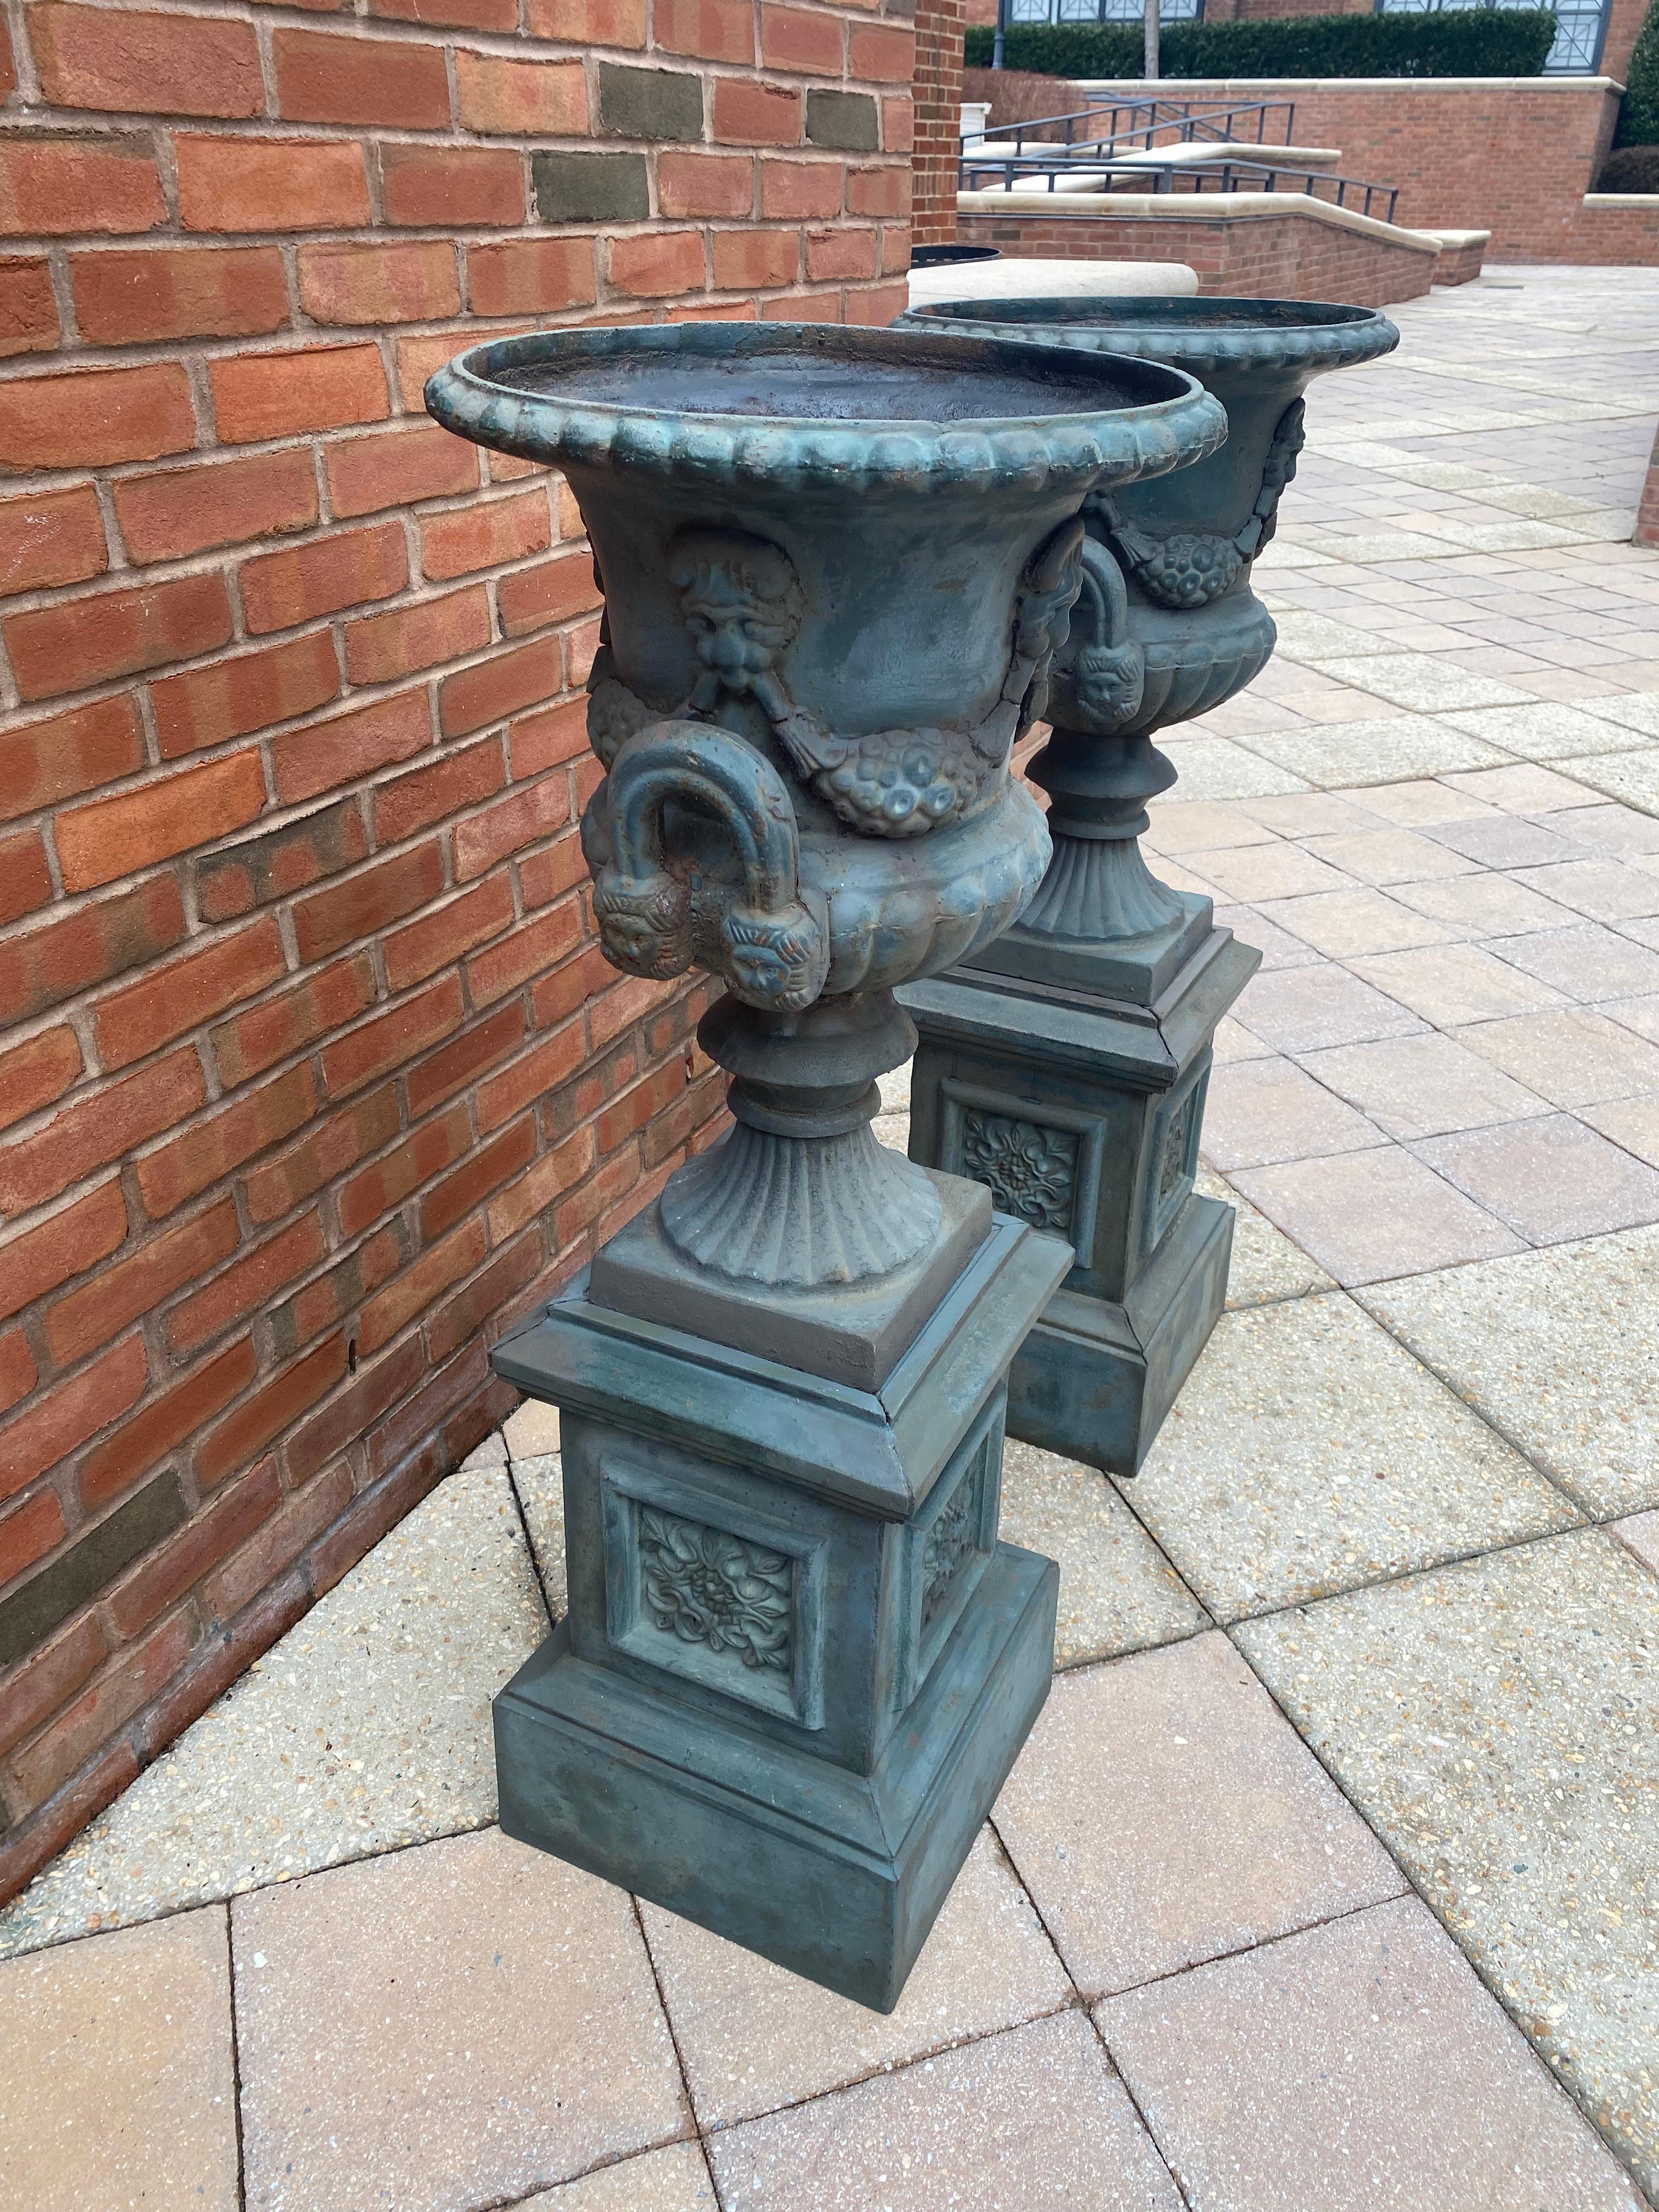 Impressive pair of 19th century cast iron garden urns.  Urns have amazing verdigris coloring and patina. 
Adorned with medallions and fruit, sitting on equally impressive pedestal bases.  
Recently refreshed by professional restorer. 

4 pieces- 2